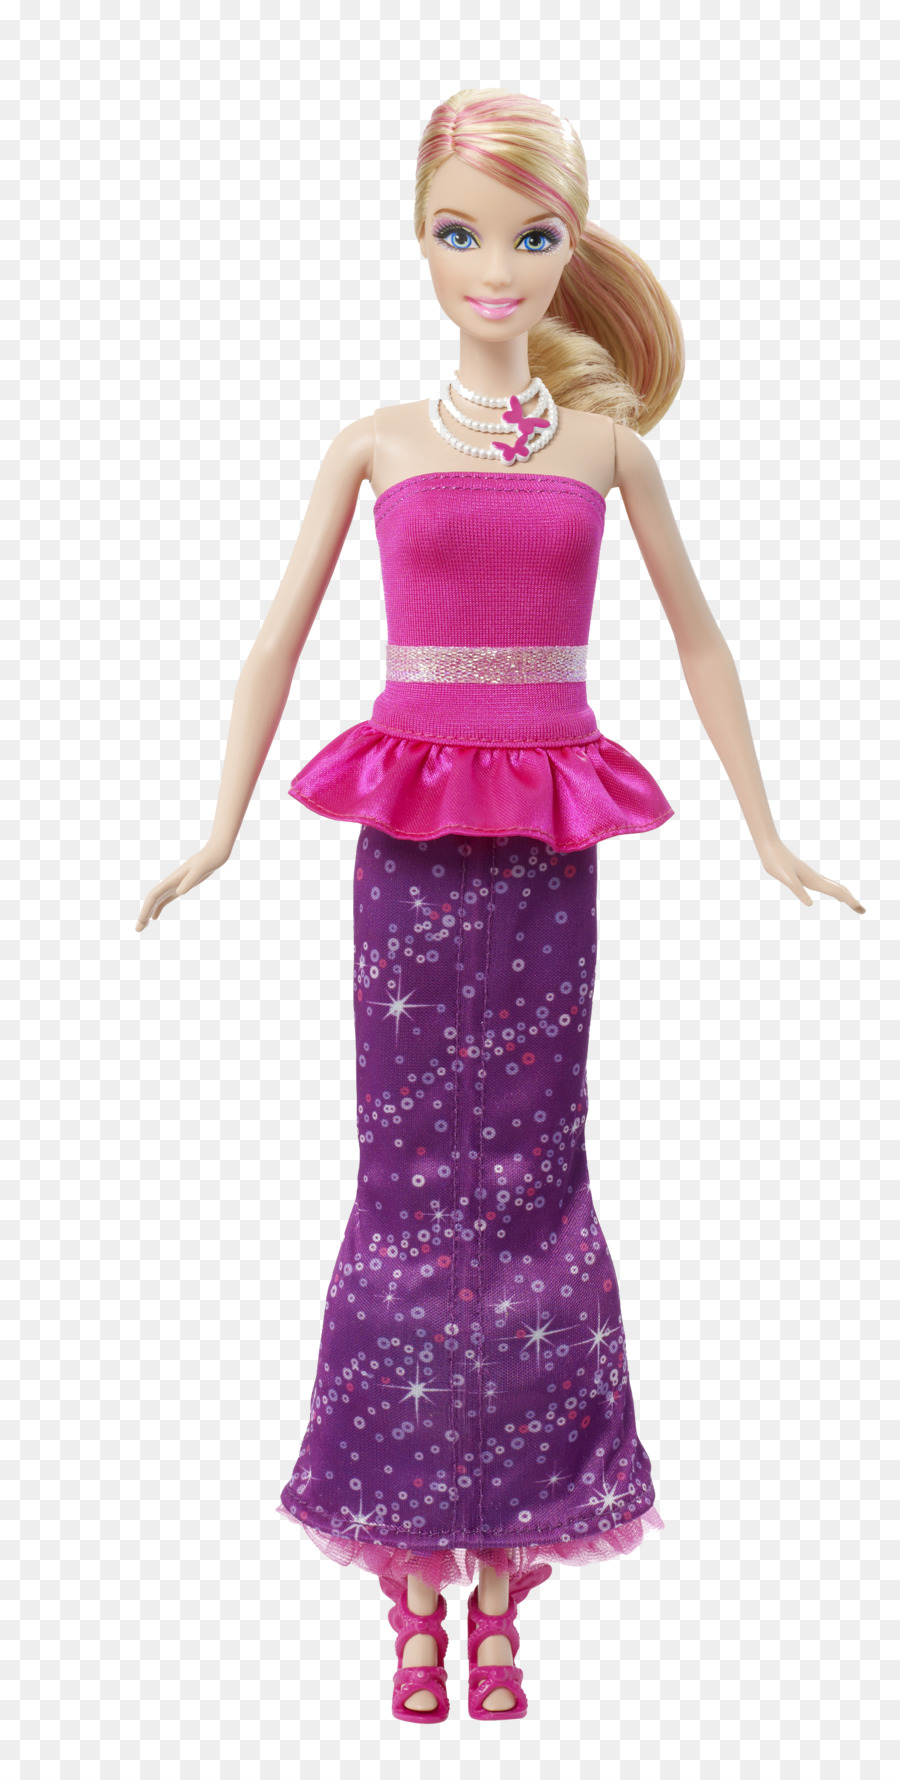 Barbie: A Fairy Secret Barbie Doll Fairy of the Garden Barbie - Doll PNG Photos png download - 1526*3000 - Free Transparent Barbie A Fairy Secret png Download.